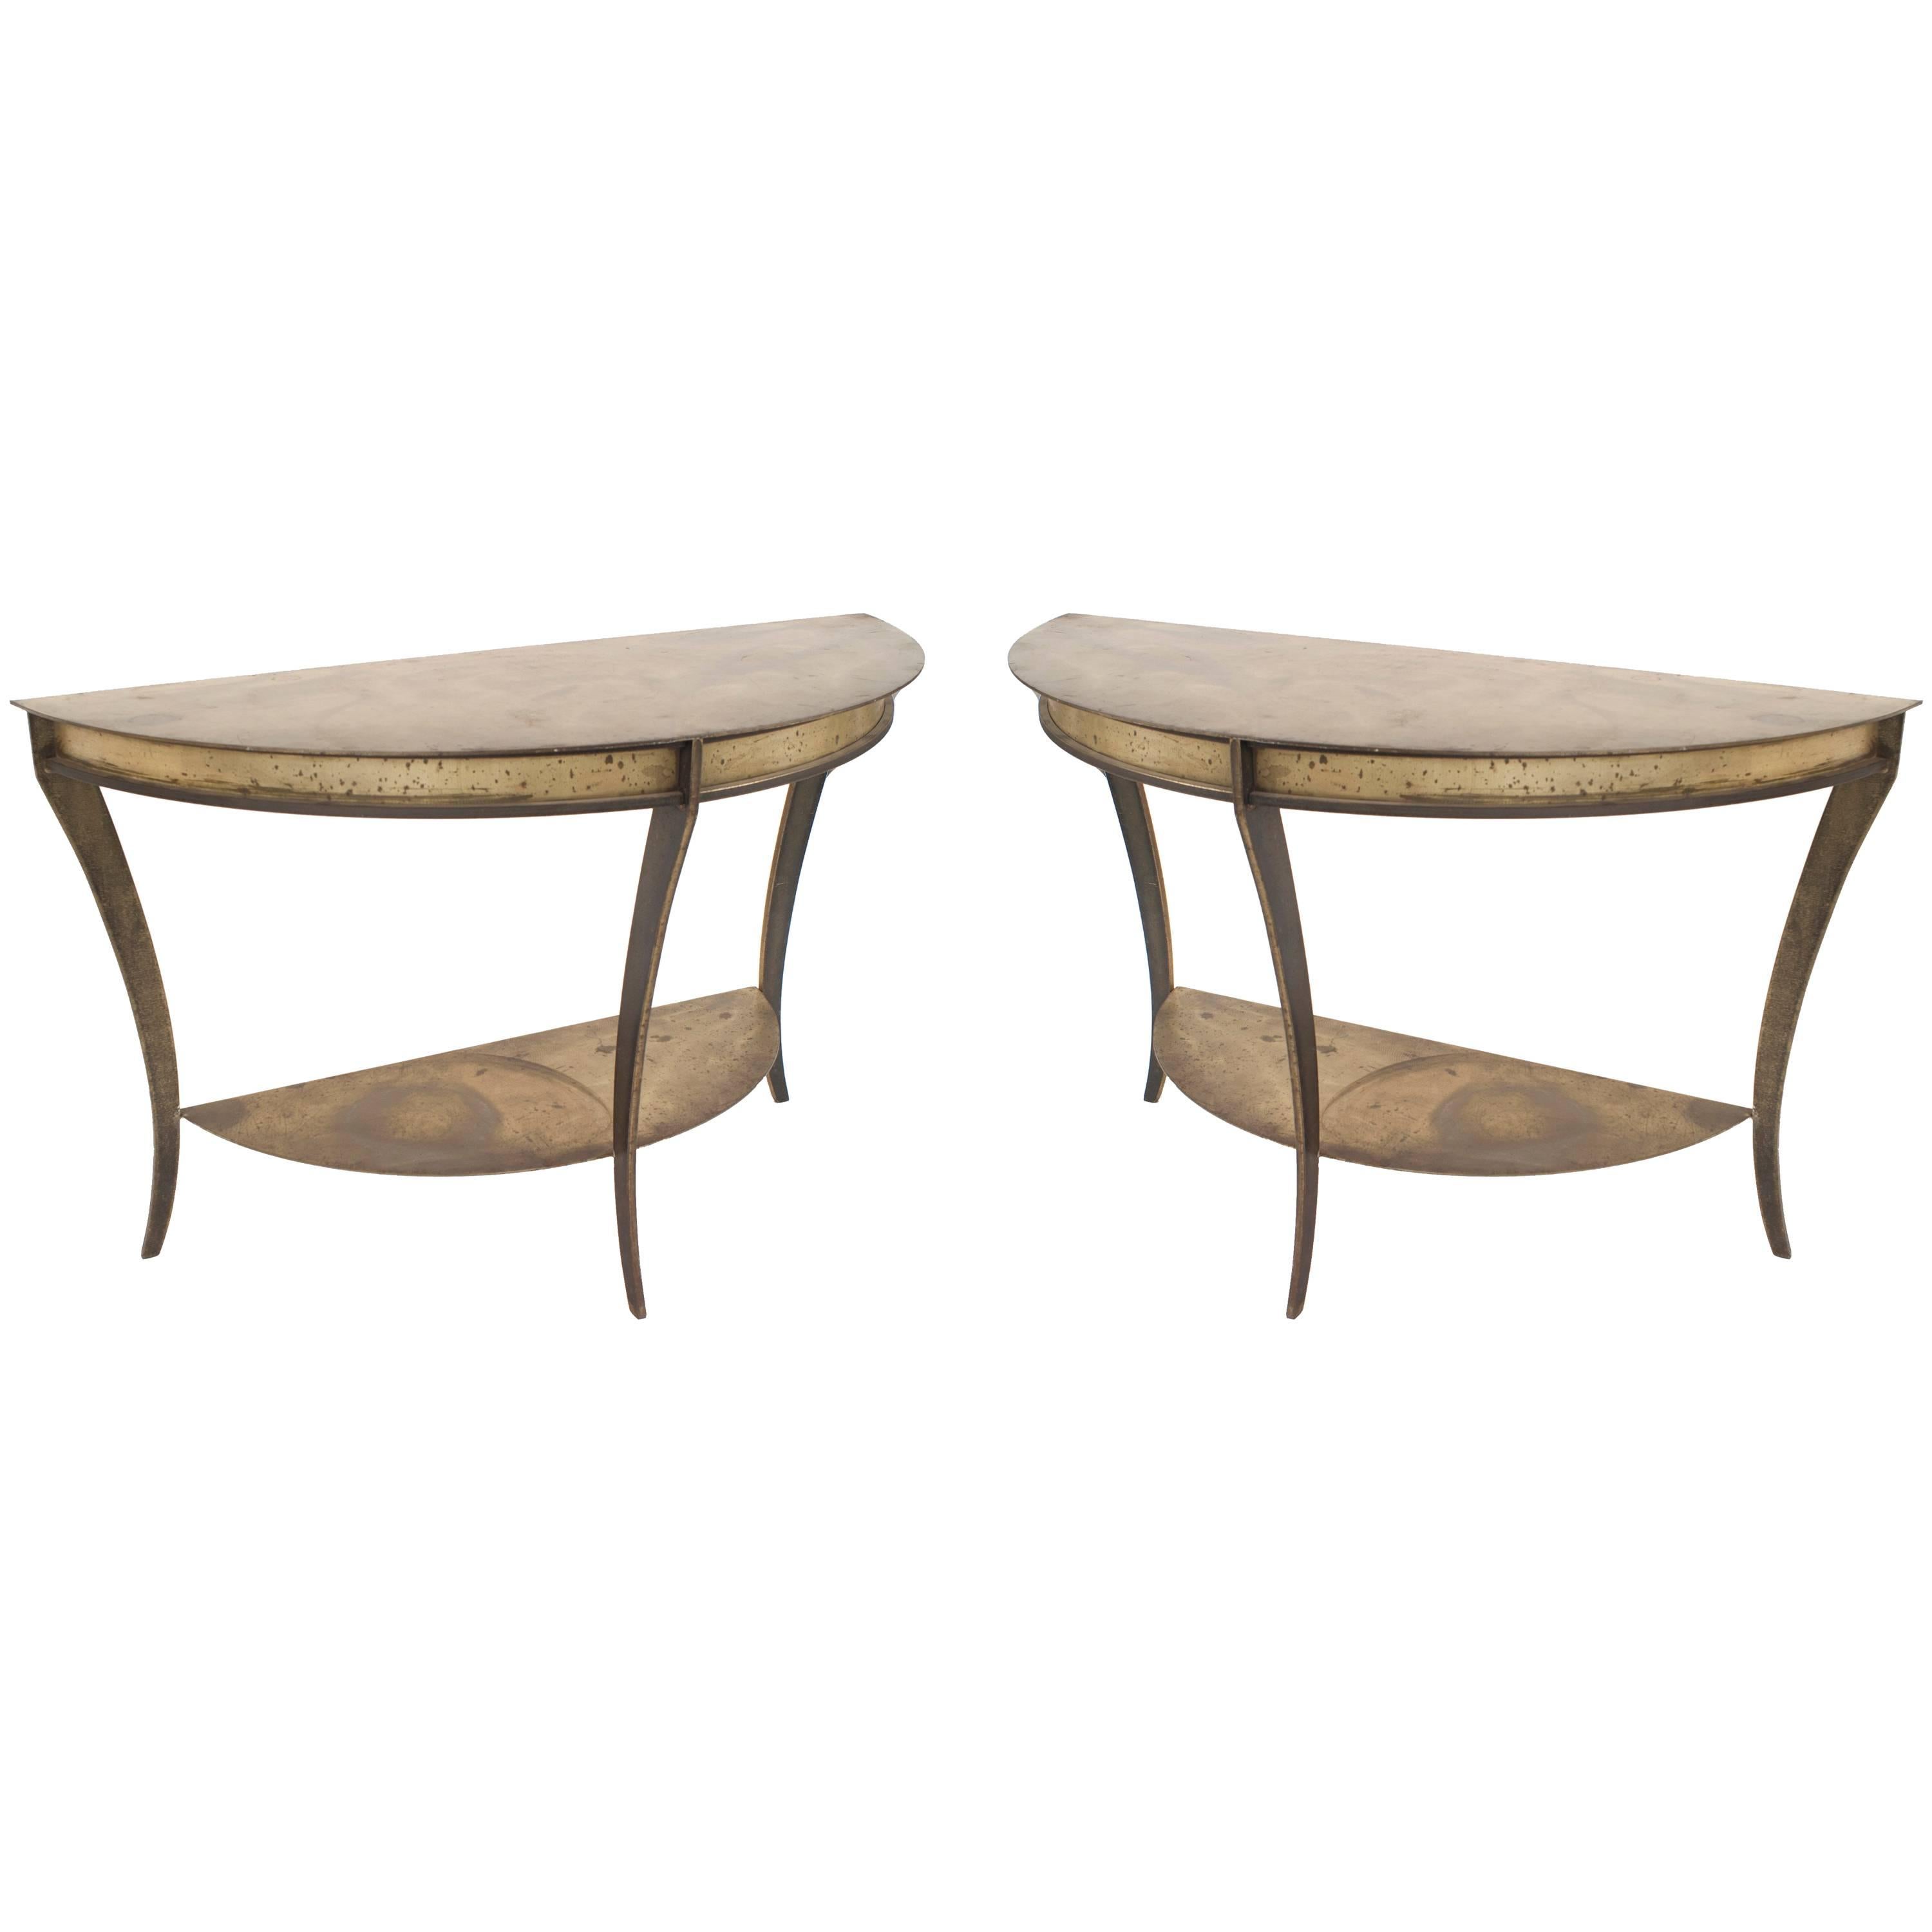 Pair of American Mid-Century Brass and Steel Demilune Console Tables